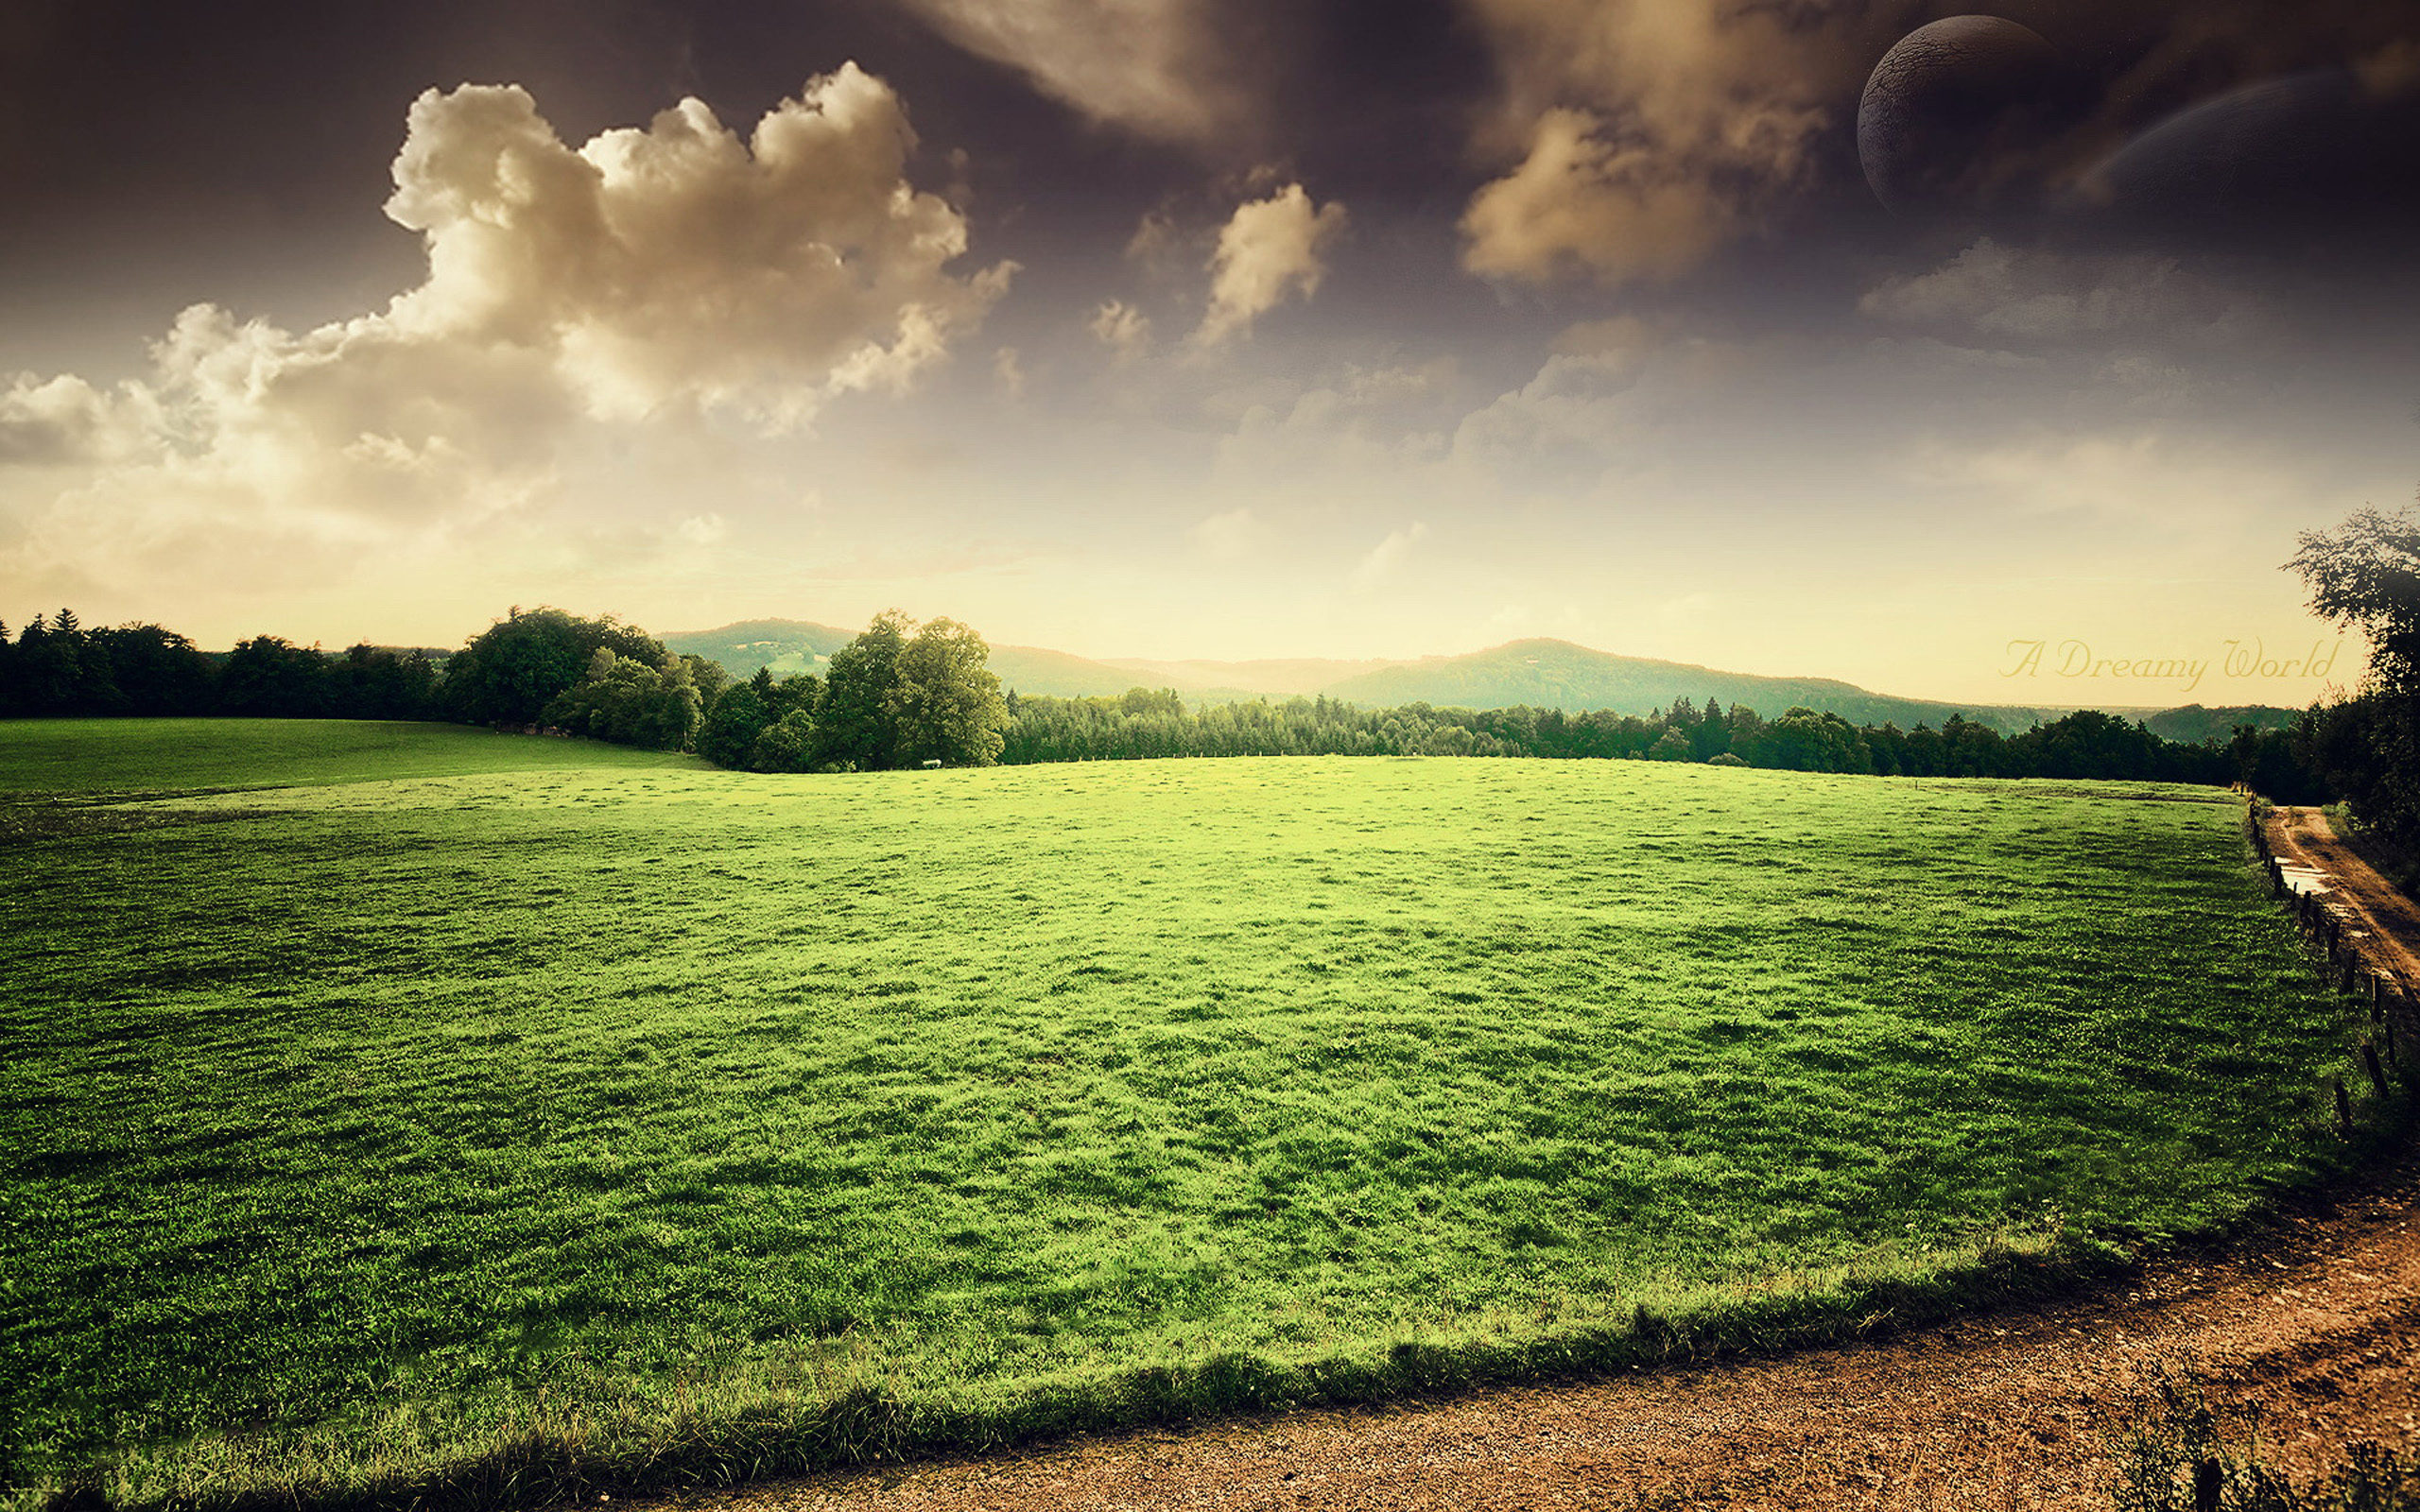 Green Grass Country Road - A Dreamy World by ayegraphics